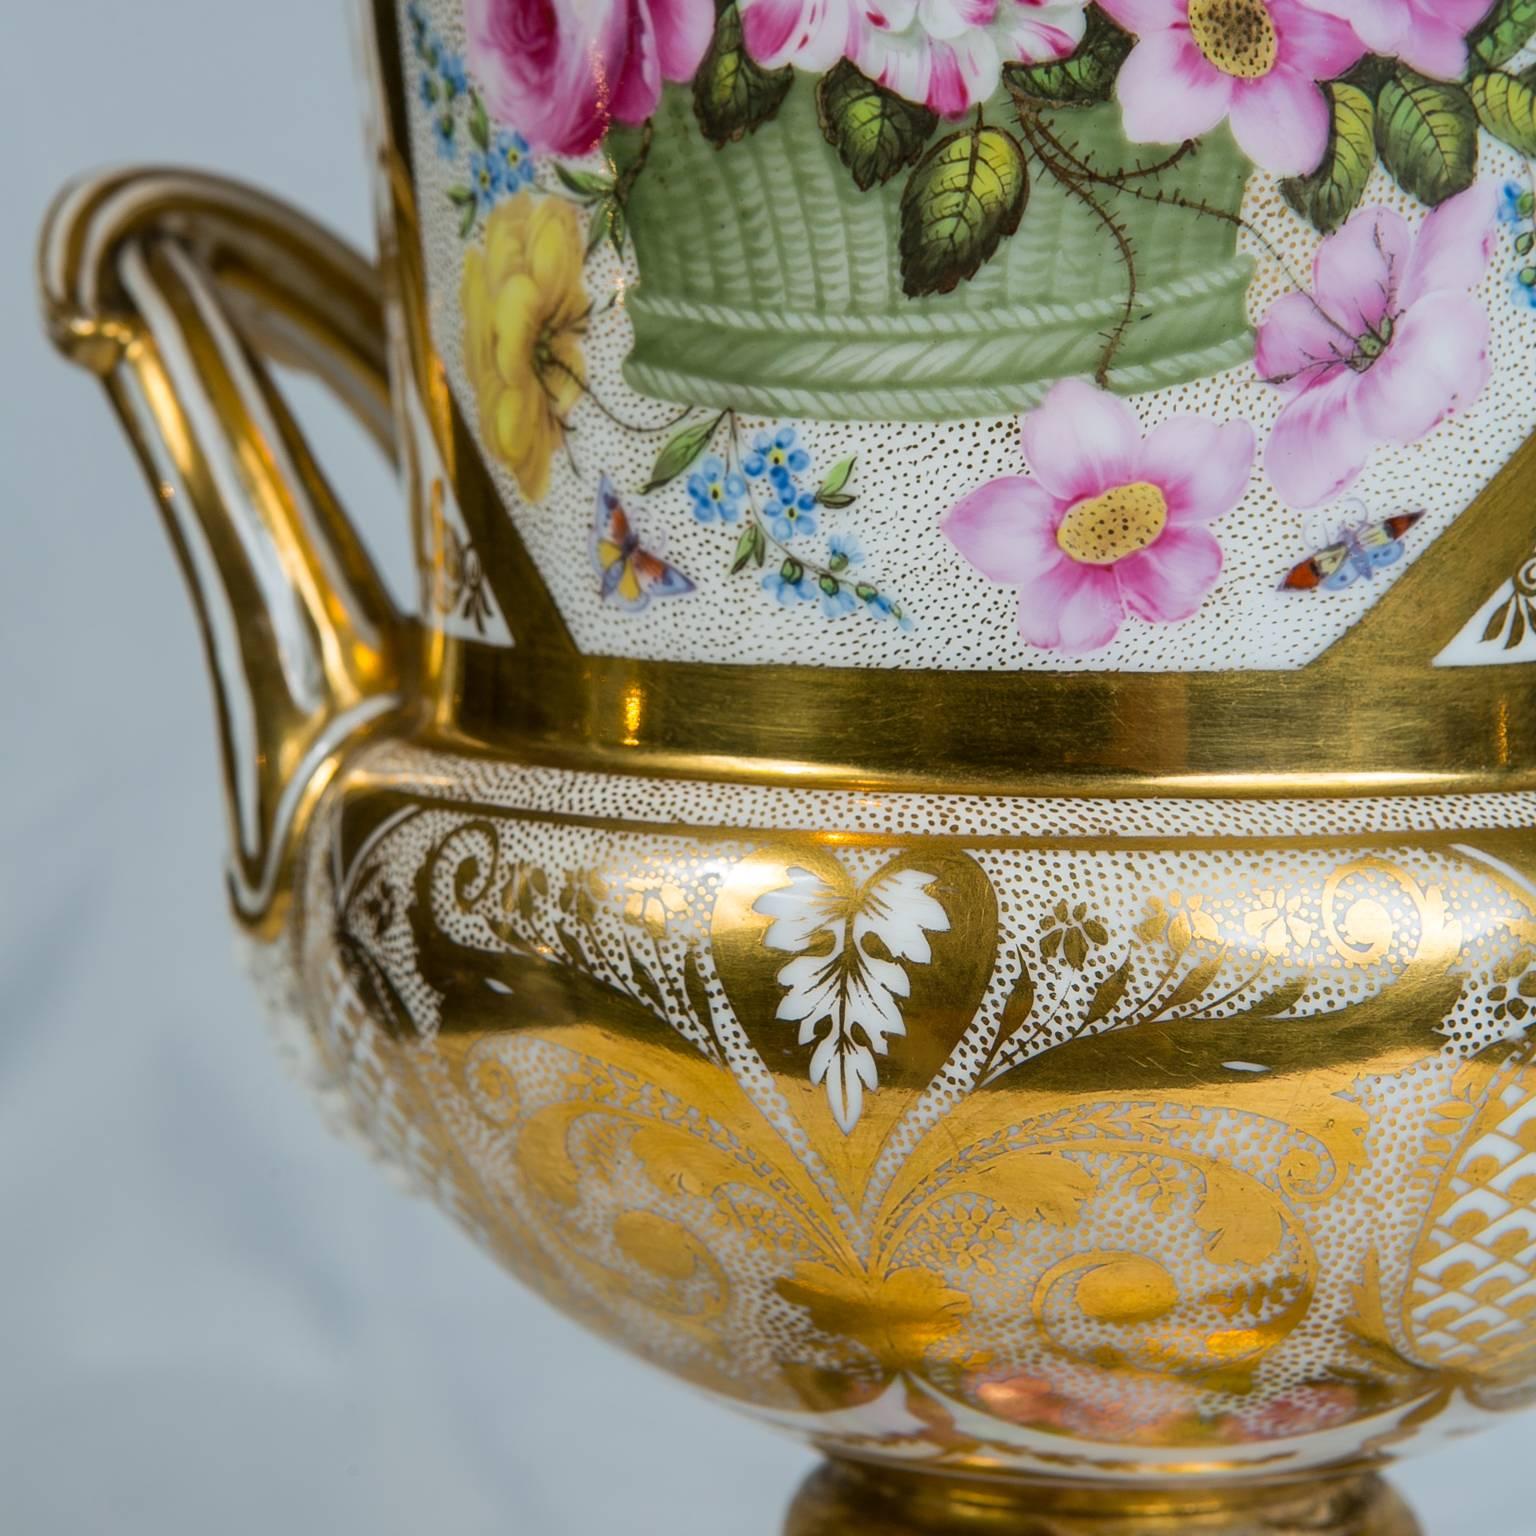 Hand-Painted Antique Spode Porcelain Urn Made in England circa 1810 For Sale